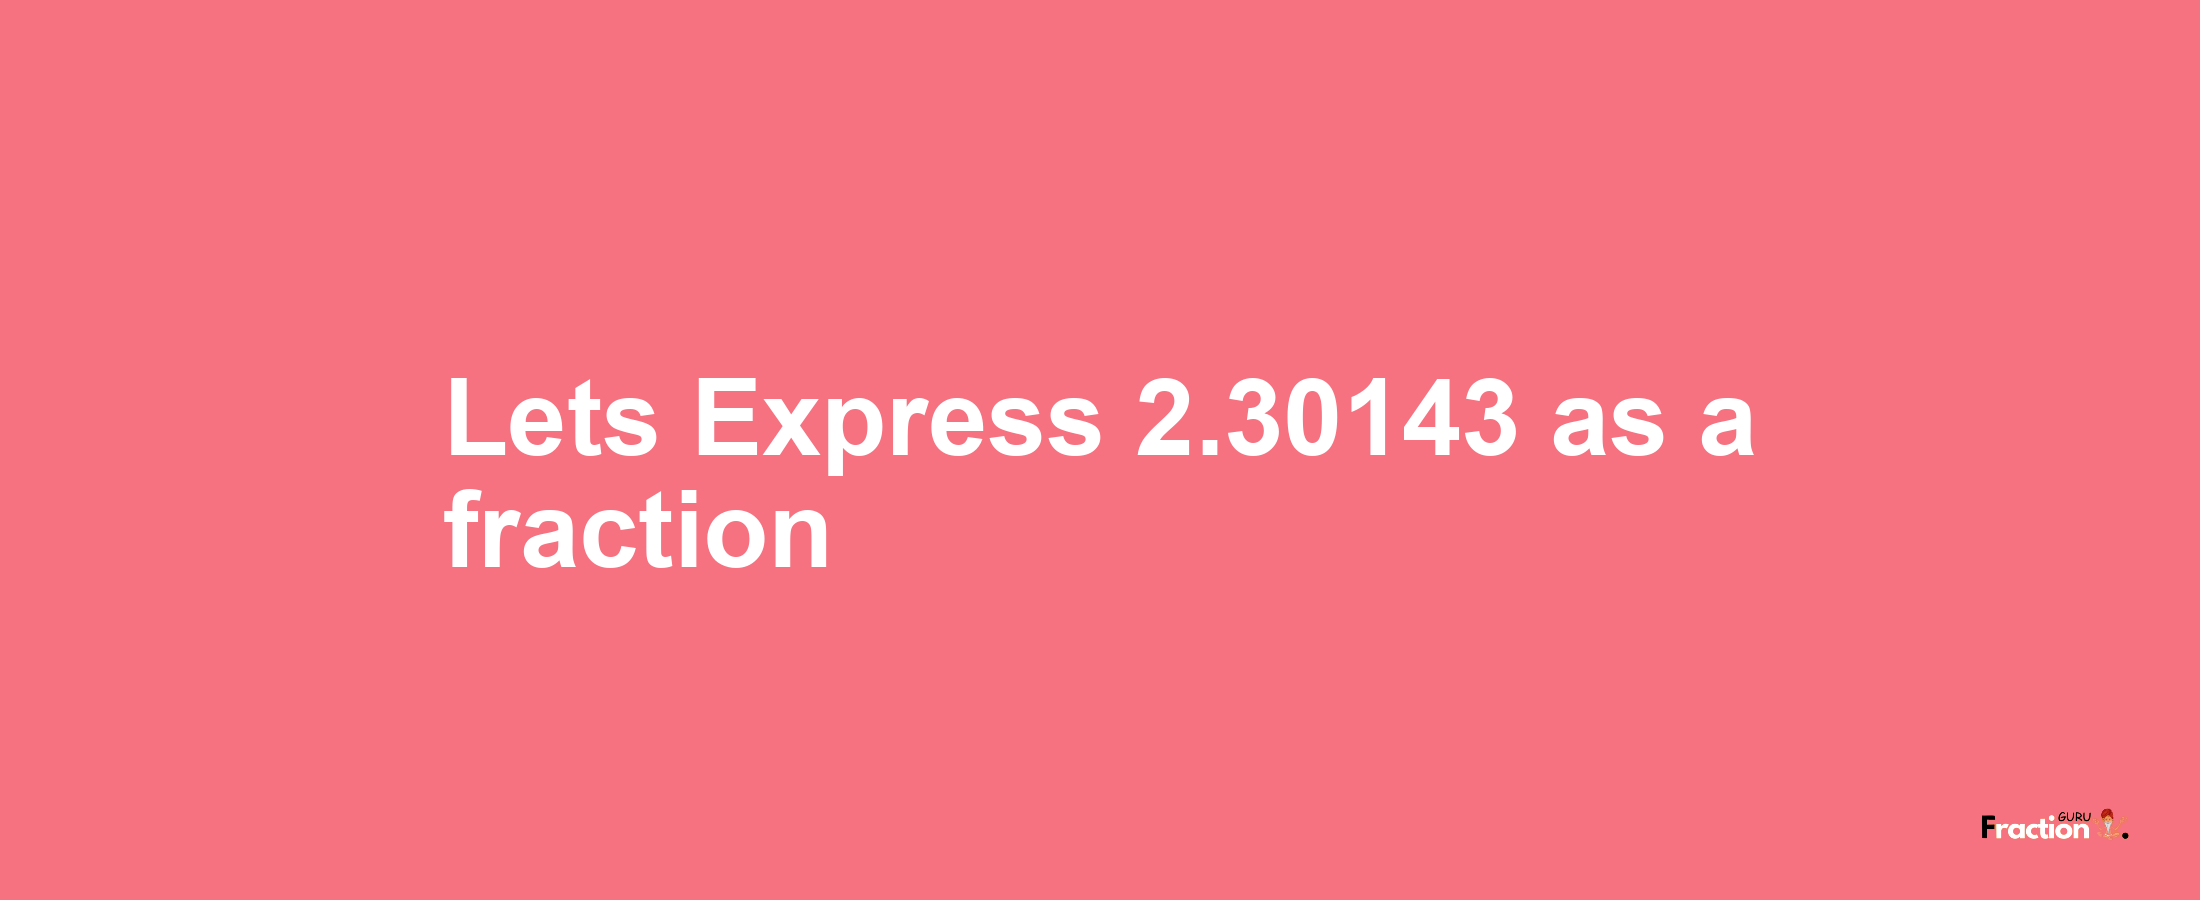 Lets Express 2.30143 as afraction